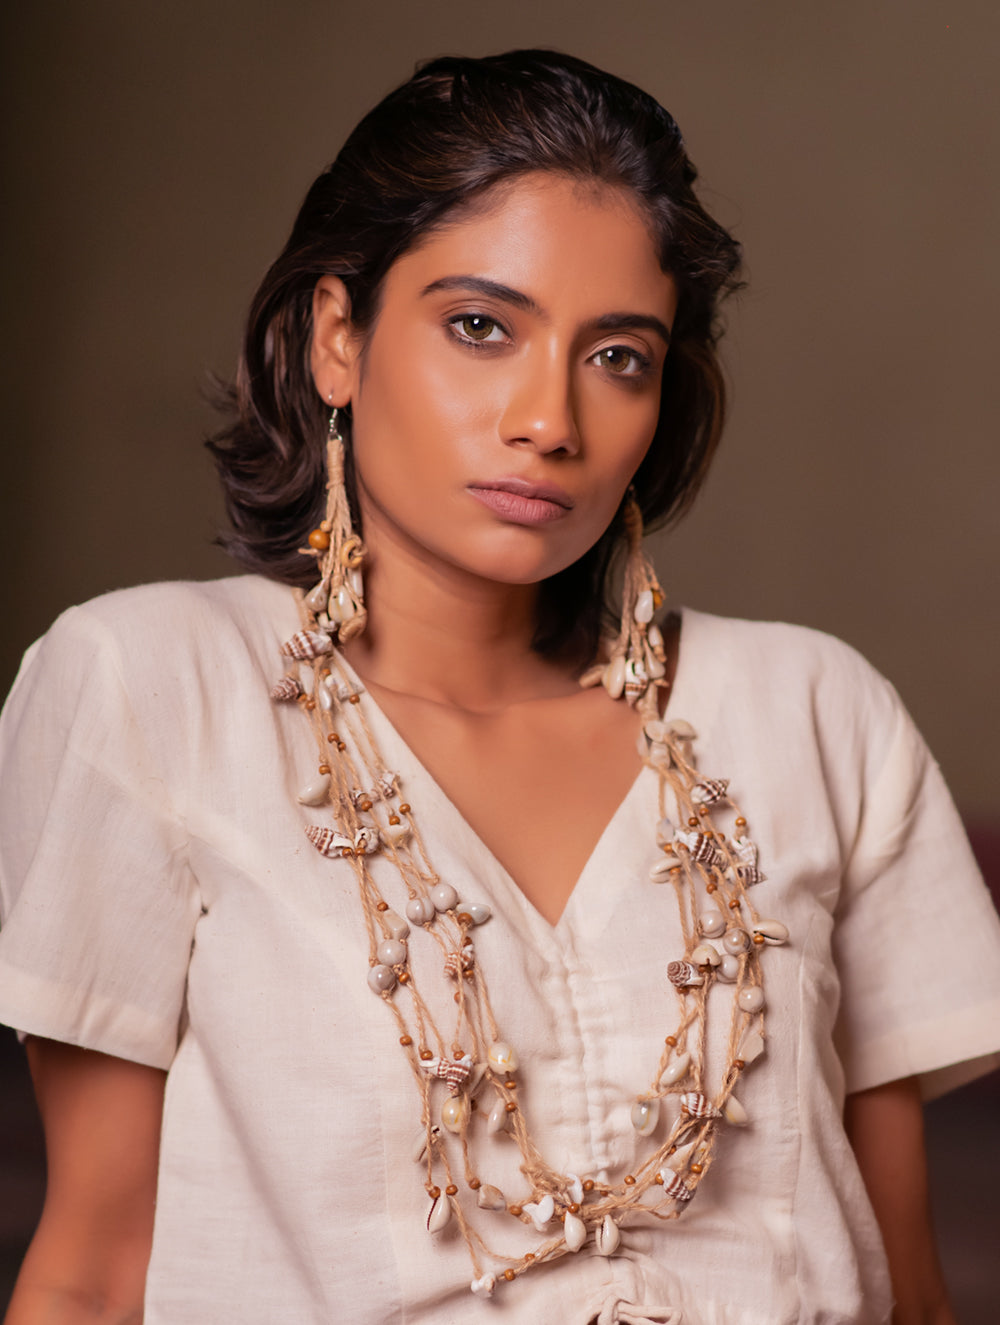 Load image into Gallery viewer, Summer Breeze Jute Earrings &amp; Necklace